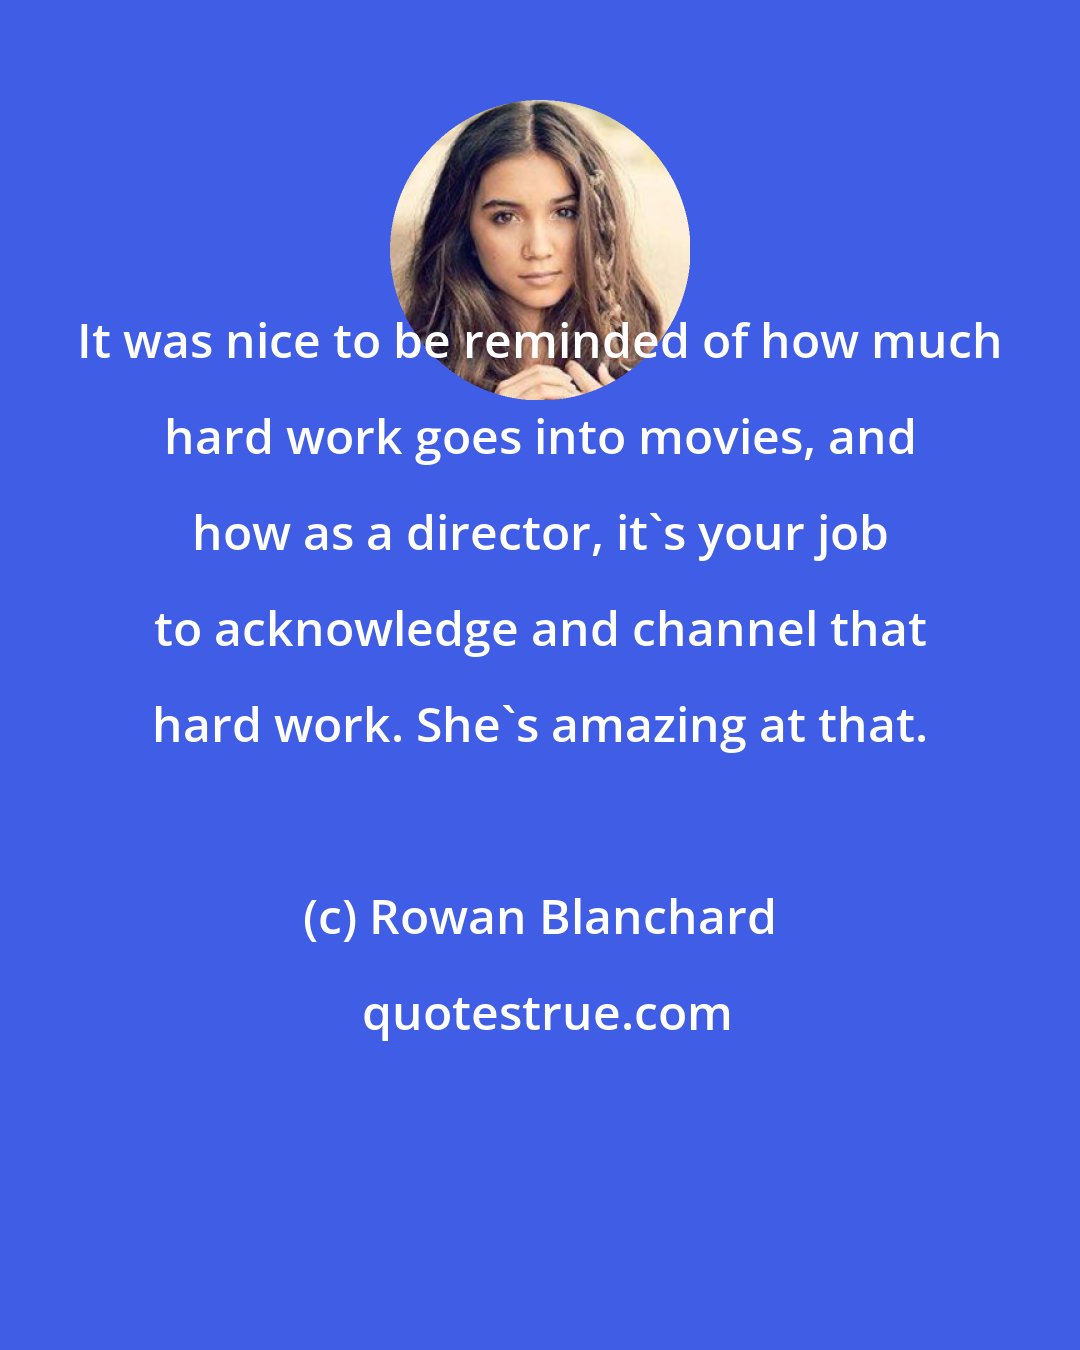 Rowan Blanchard: It was nice to be reminded of how much hard work goes into movies, and how as a director, it's your job to acknowledge and channel that hard work. She's amazing at that.